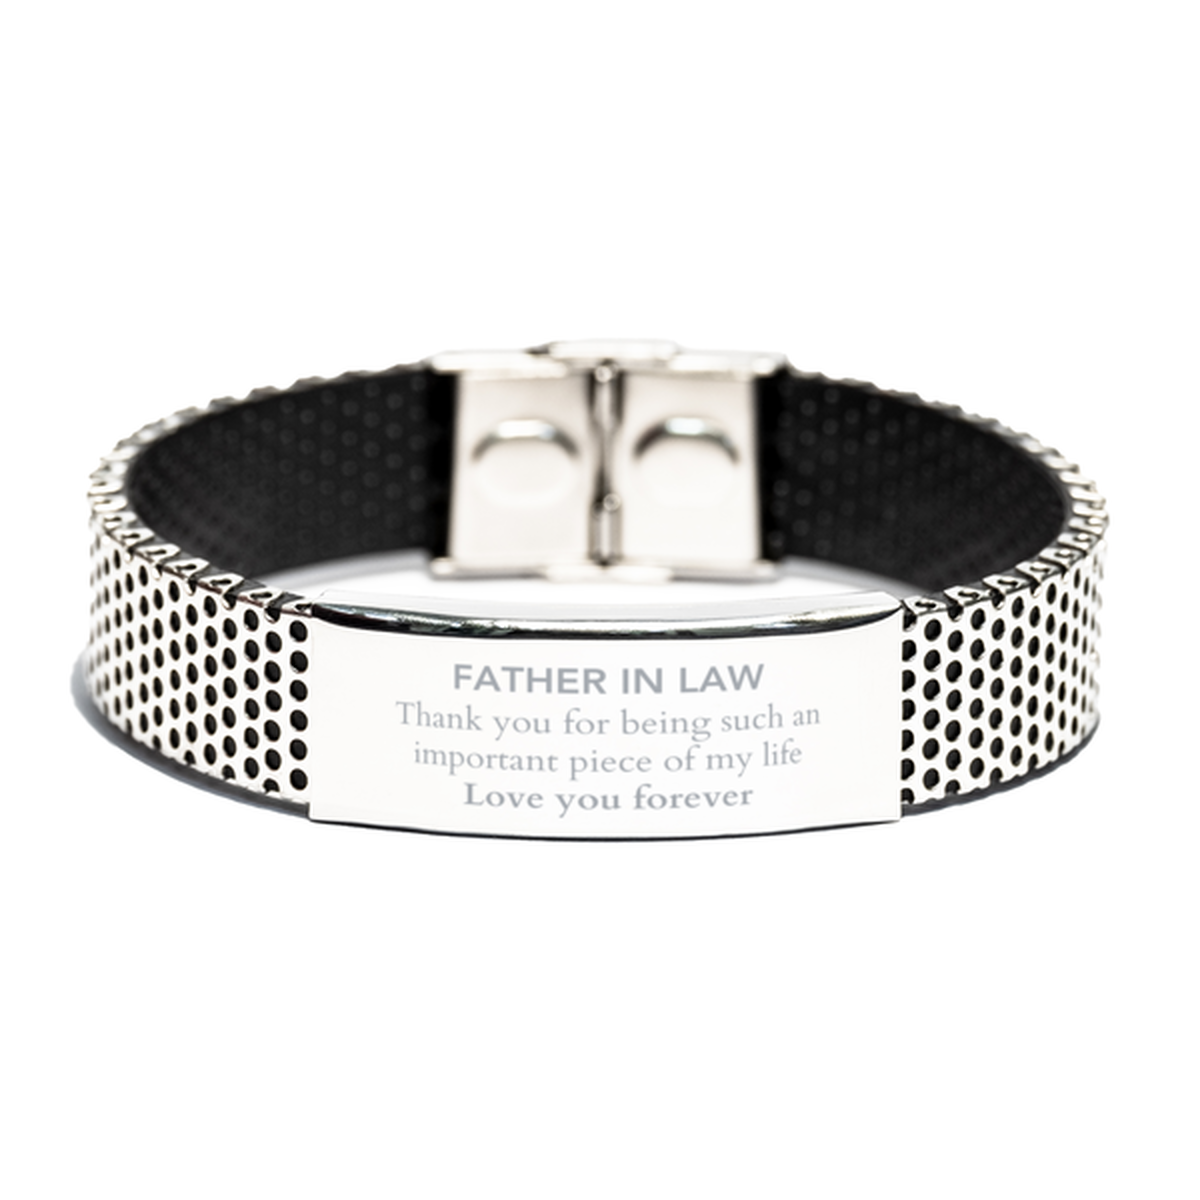 Appropriate Father In Law Stainless Steel Bracelet Epic Birthday Gifts for Father In Law Thank you for being such an important piece of my life Father In Law Christmas Mothers Fathers Day